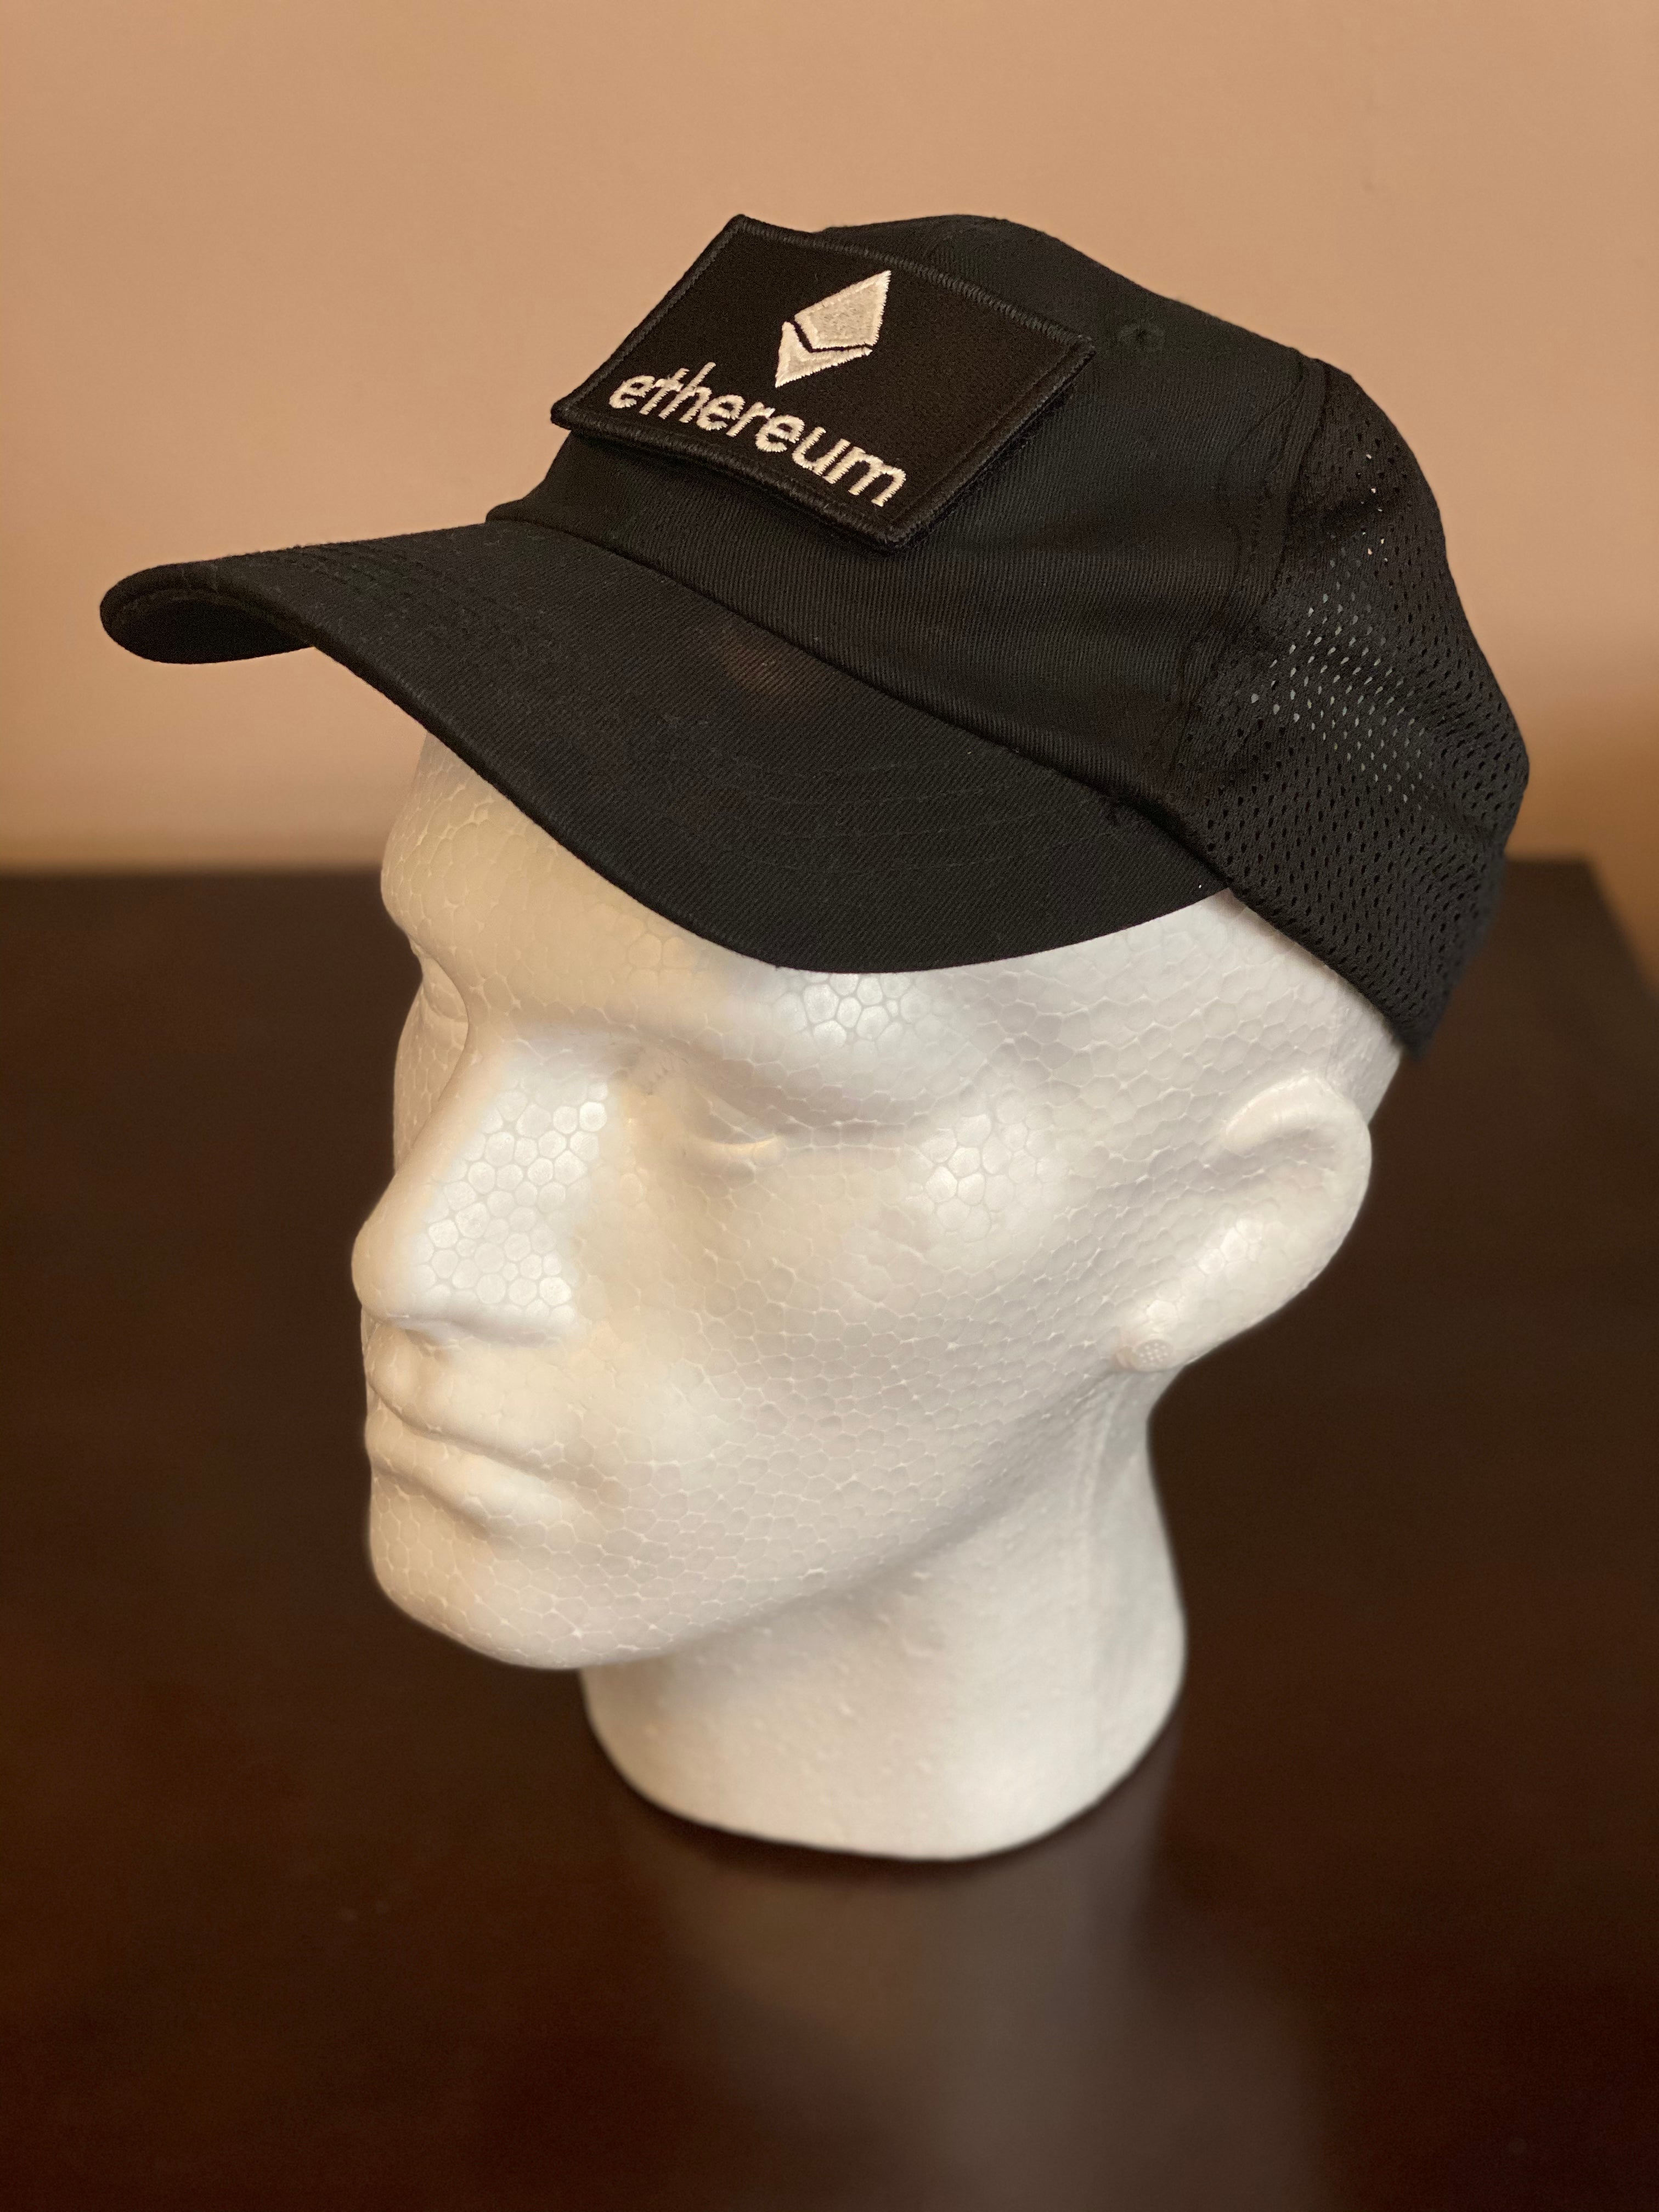 Ethereum Patch and Tac Hat Combo